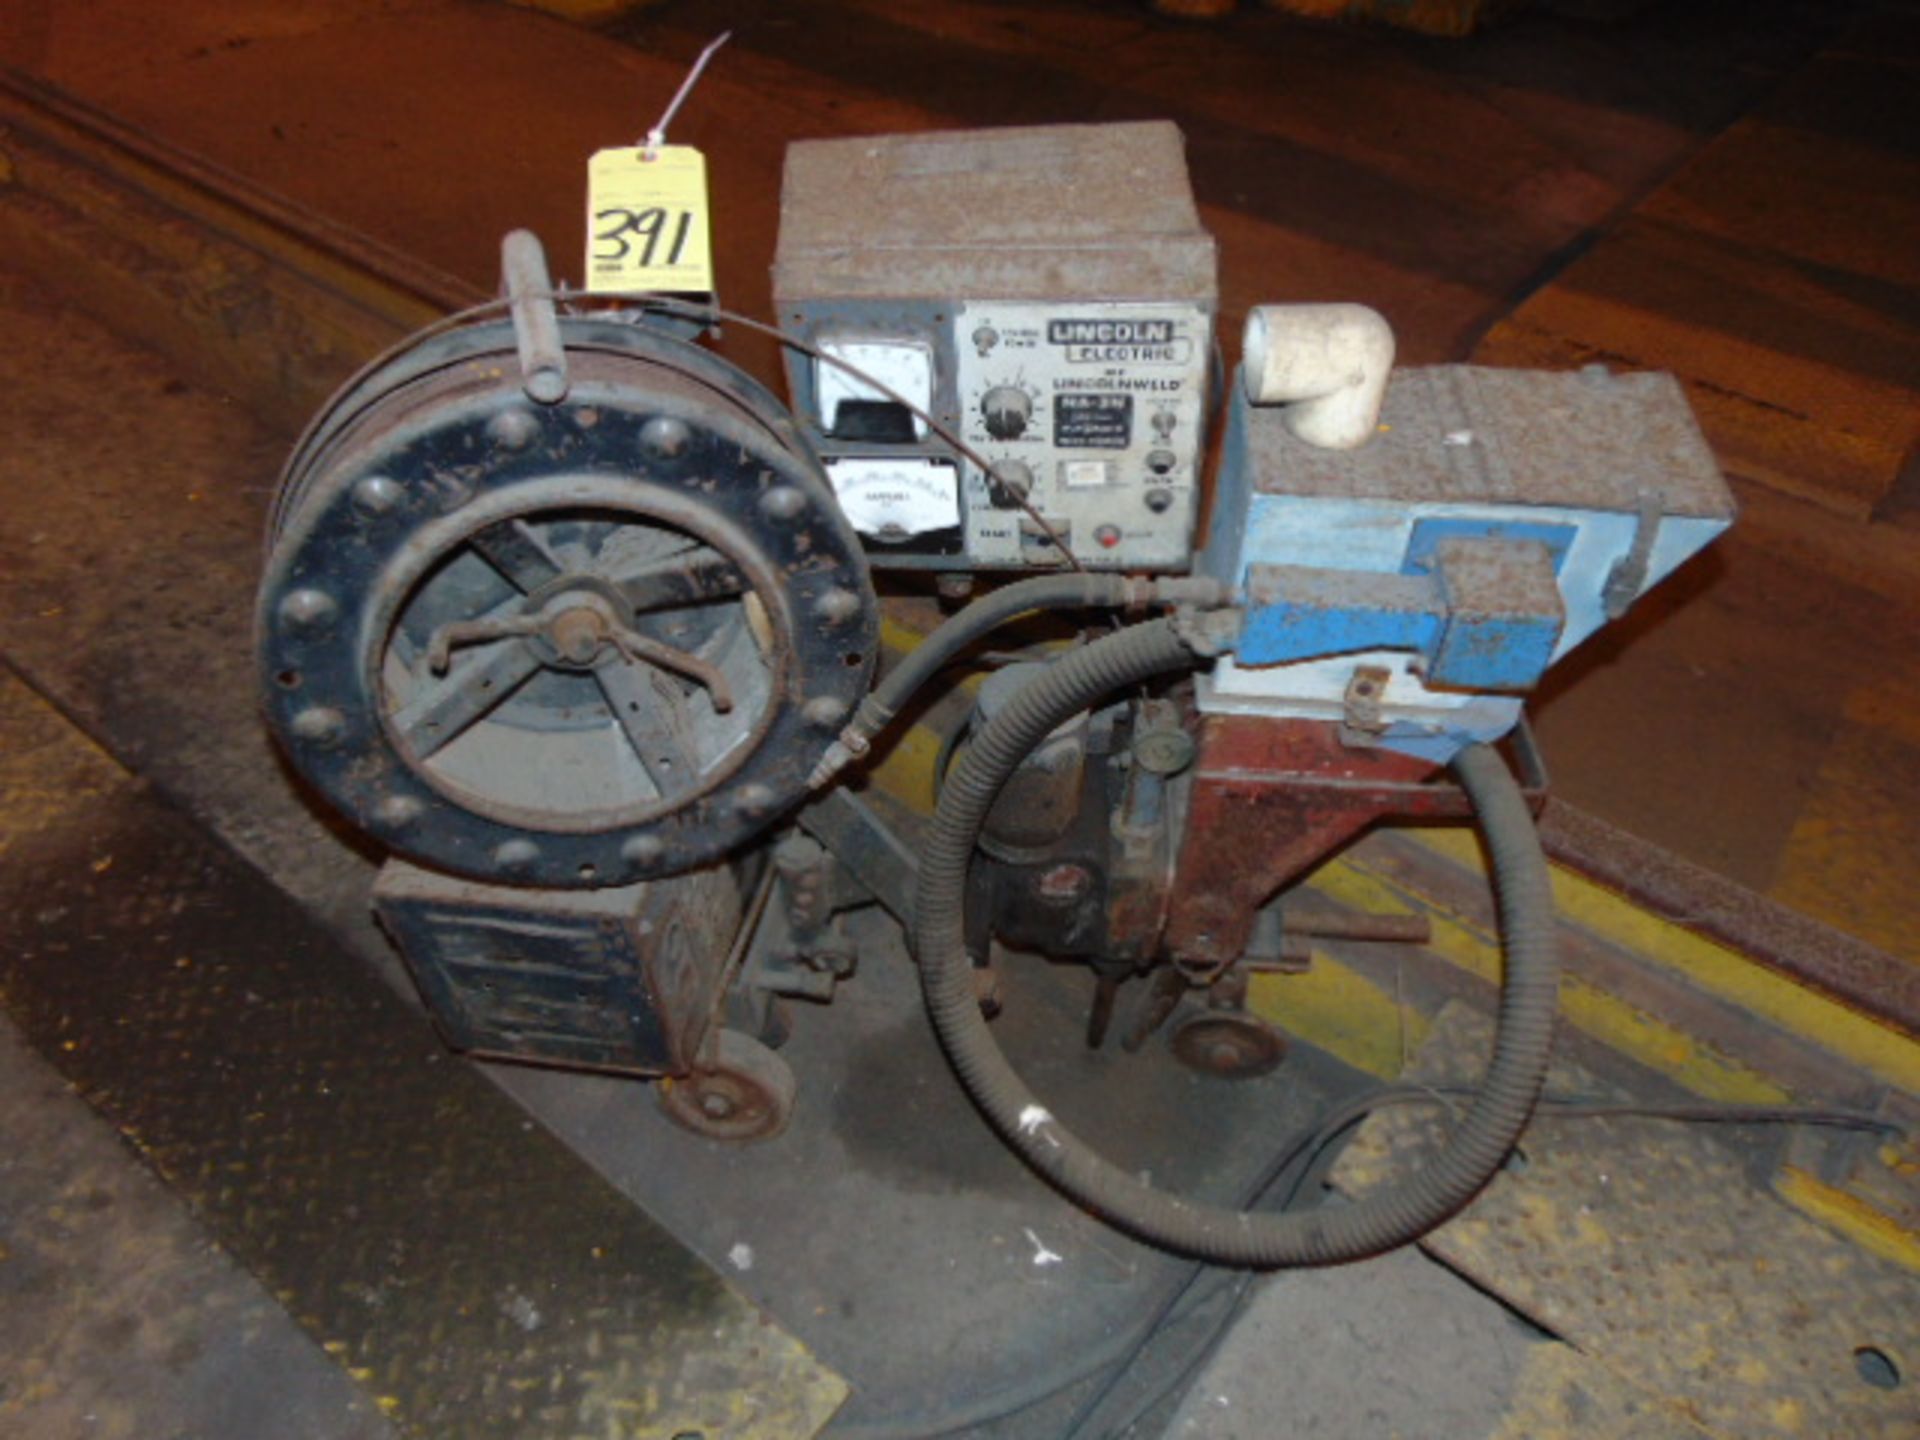 SUB-ARC WELDING TRACTOR, LINCOLN MDL. LT7, Lincoln Mdl. NA-3N welding controls, flux equipment (